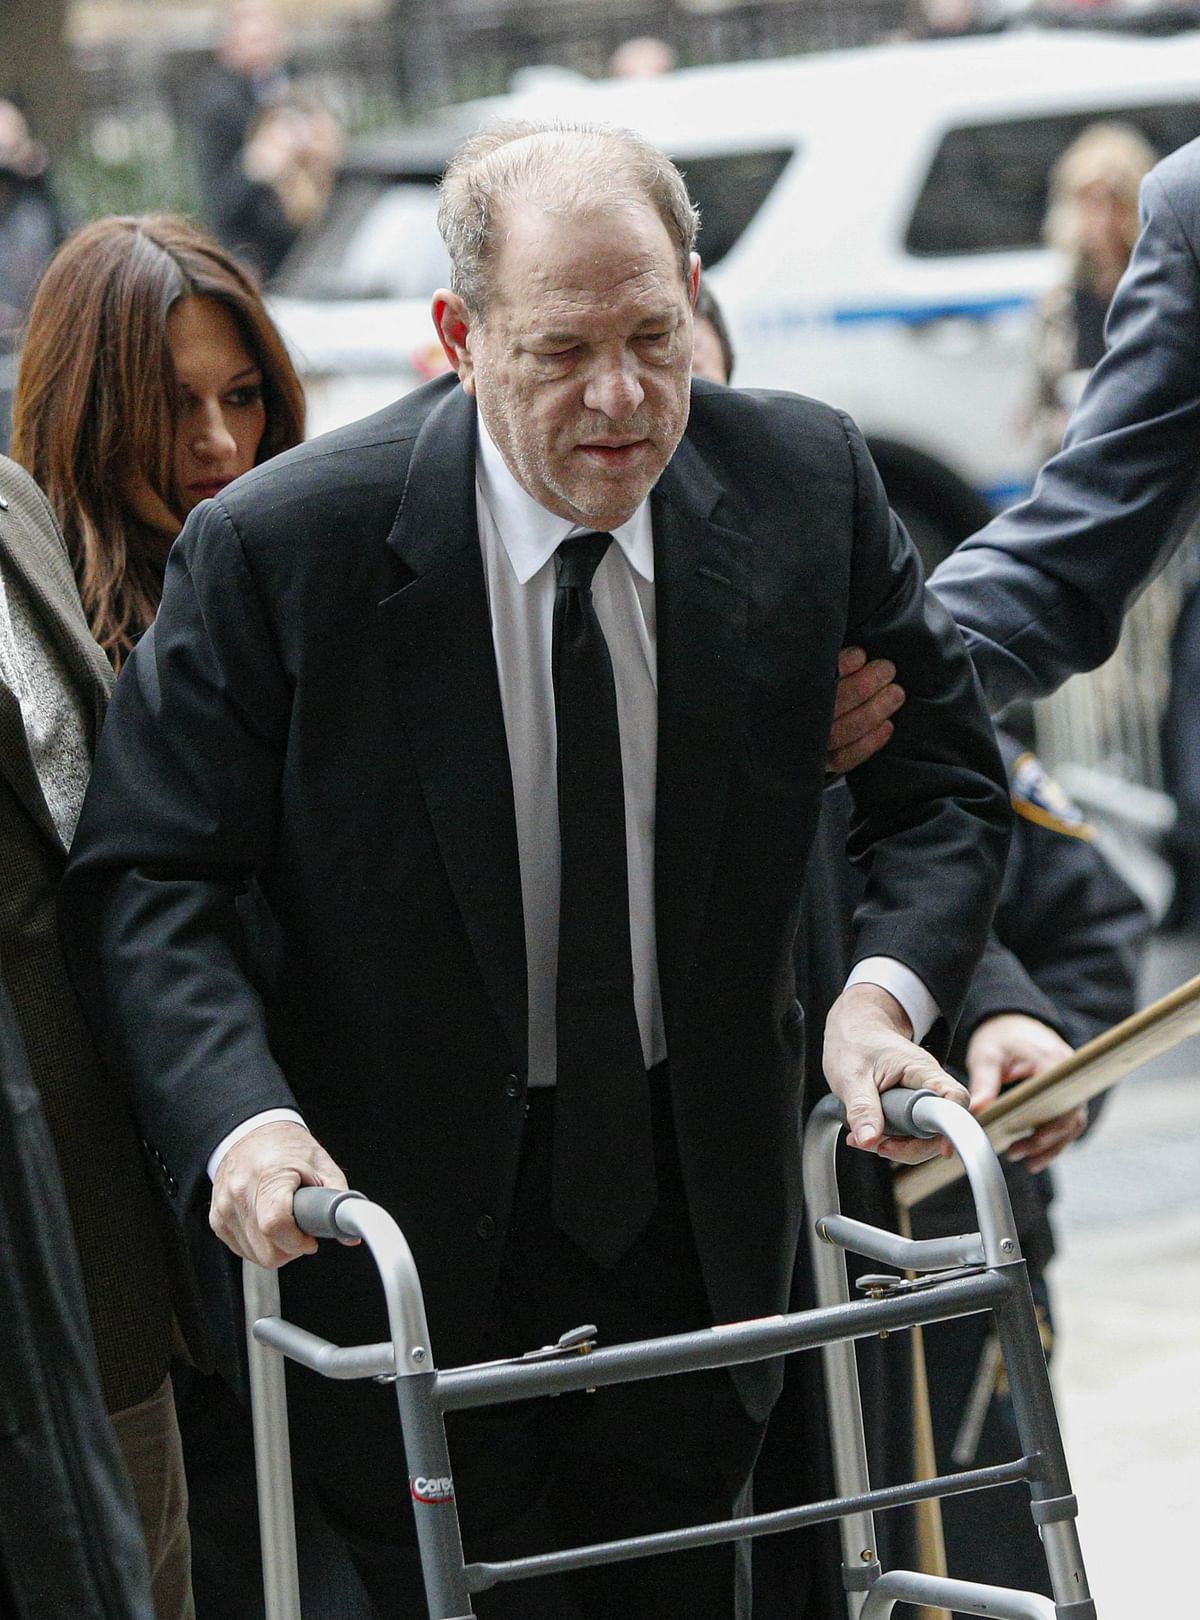 Harvey Weinstein arrives to the court on 6 January in New York City. Weinstein, a movie producer whose alleged sexual misconduct helped spark the #MeToo movement, pleaded not-guilty on five counts of rape and sexual assault against two unnamed women and faces a possible life sentence in prison. Photo: AFP